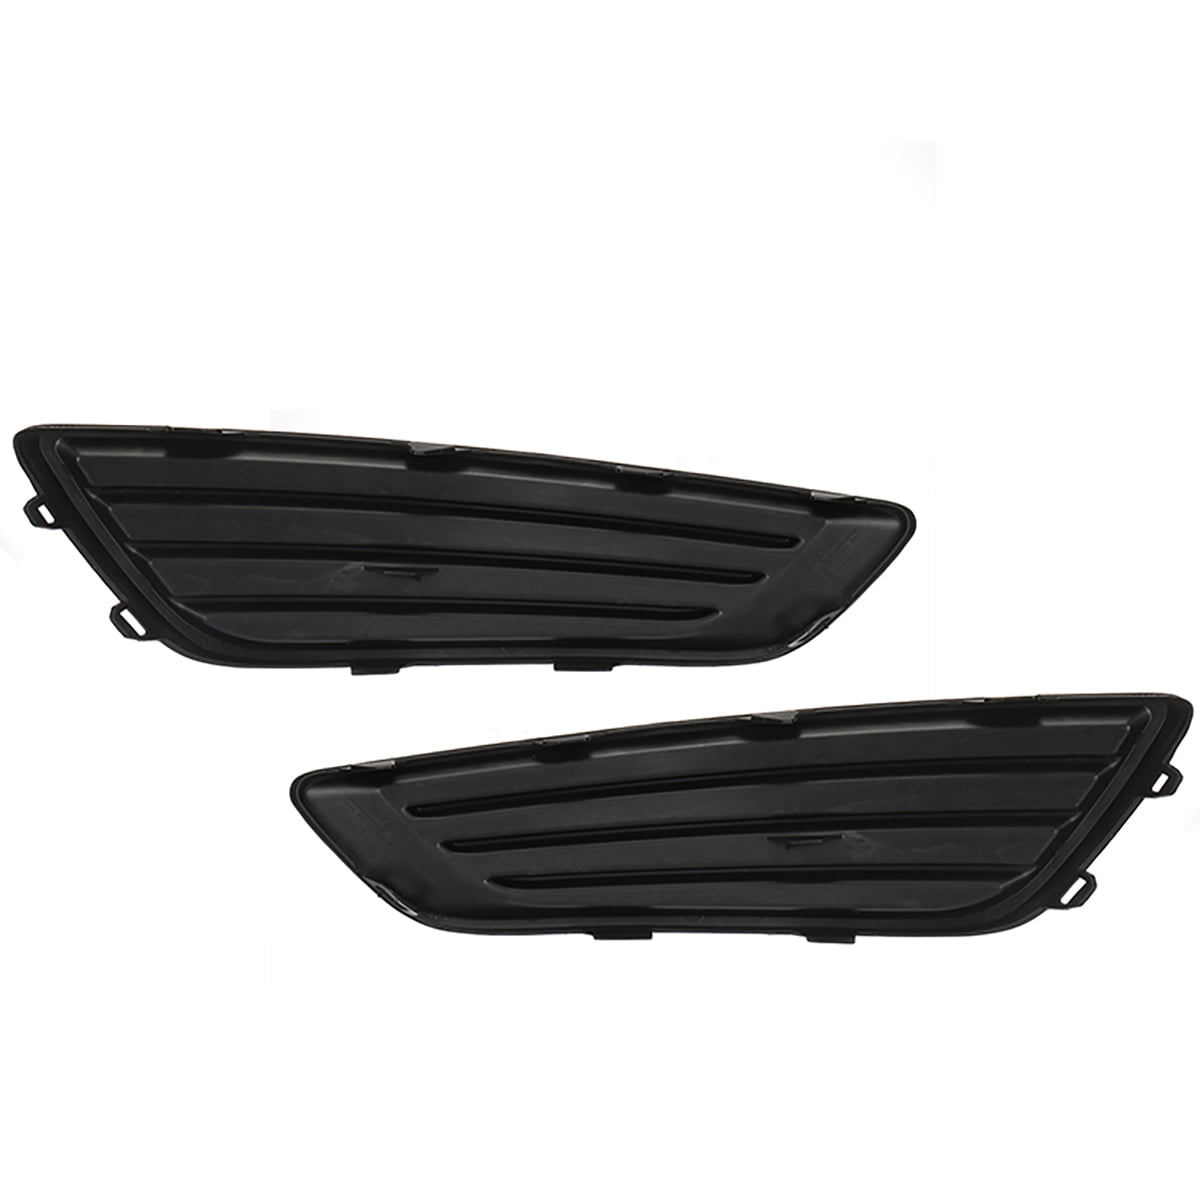 Details about   1Pair Front Bumper Fog Light Covers Bezels Insert for Ford Focus 3 III 2012-2014 